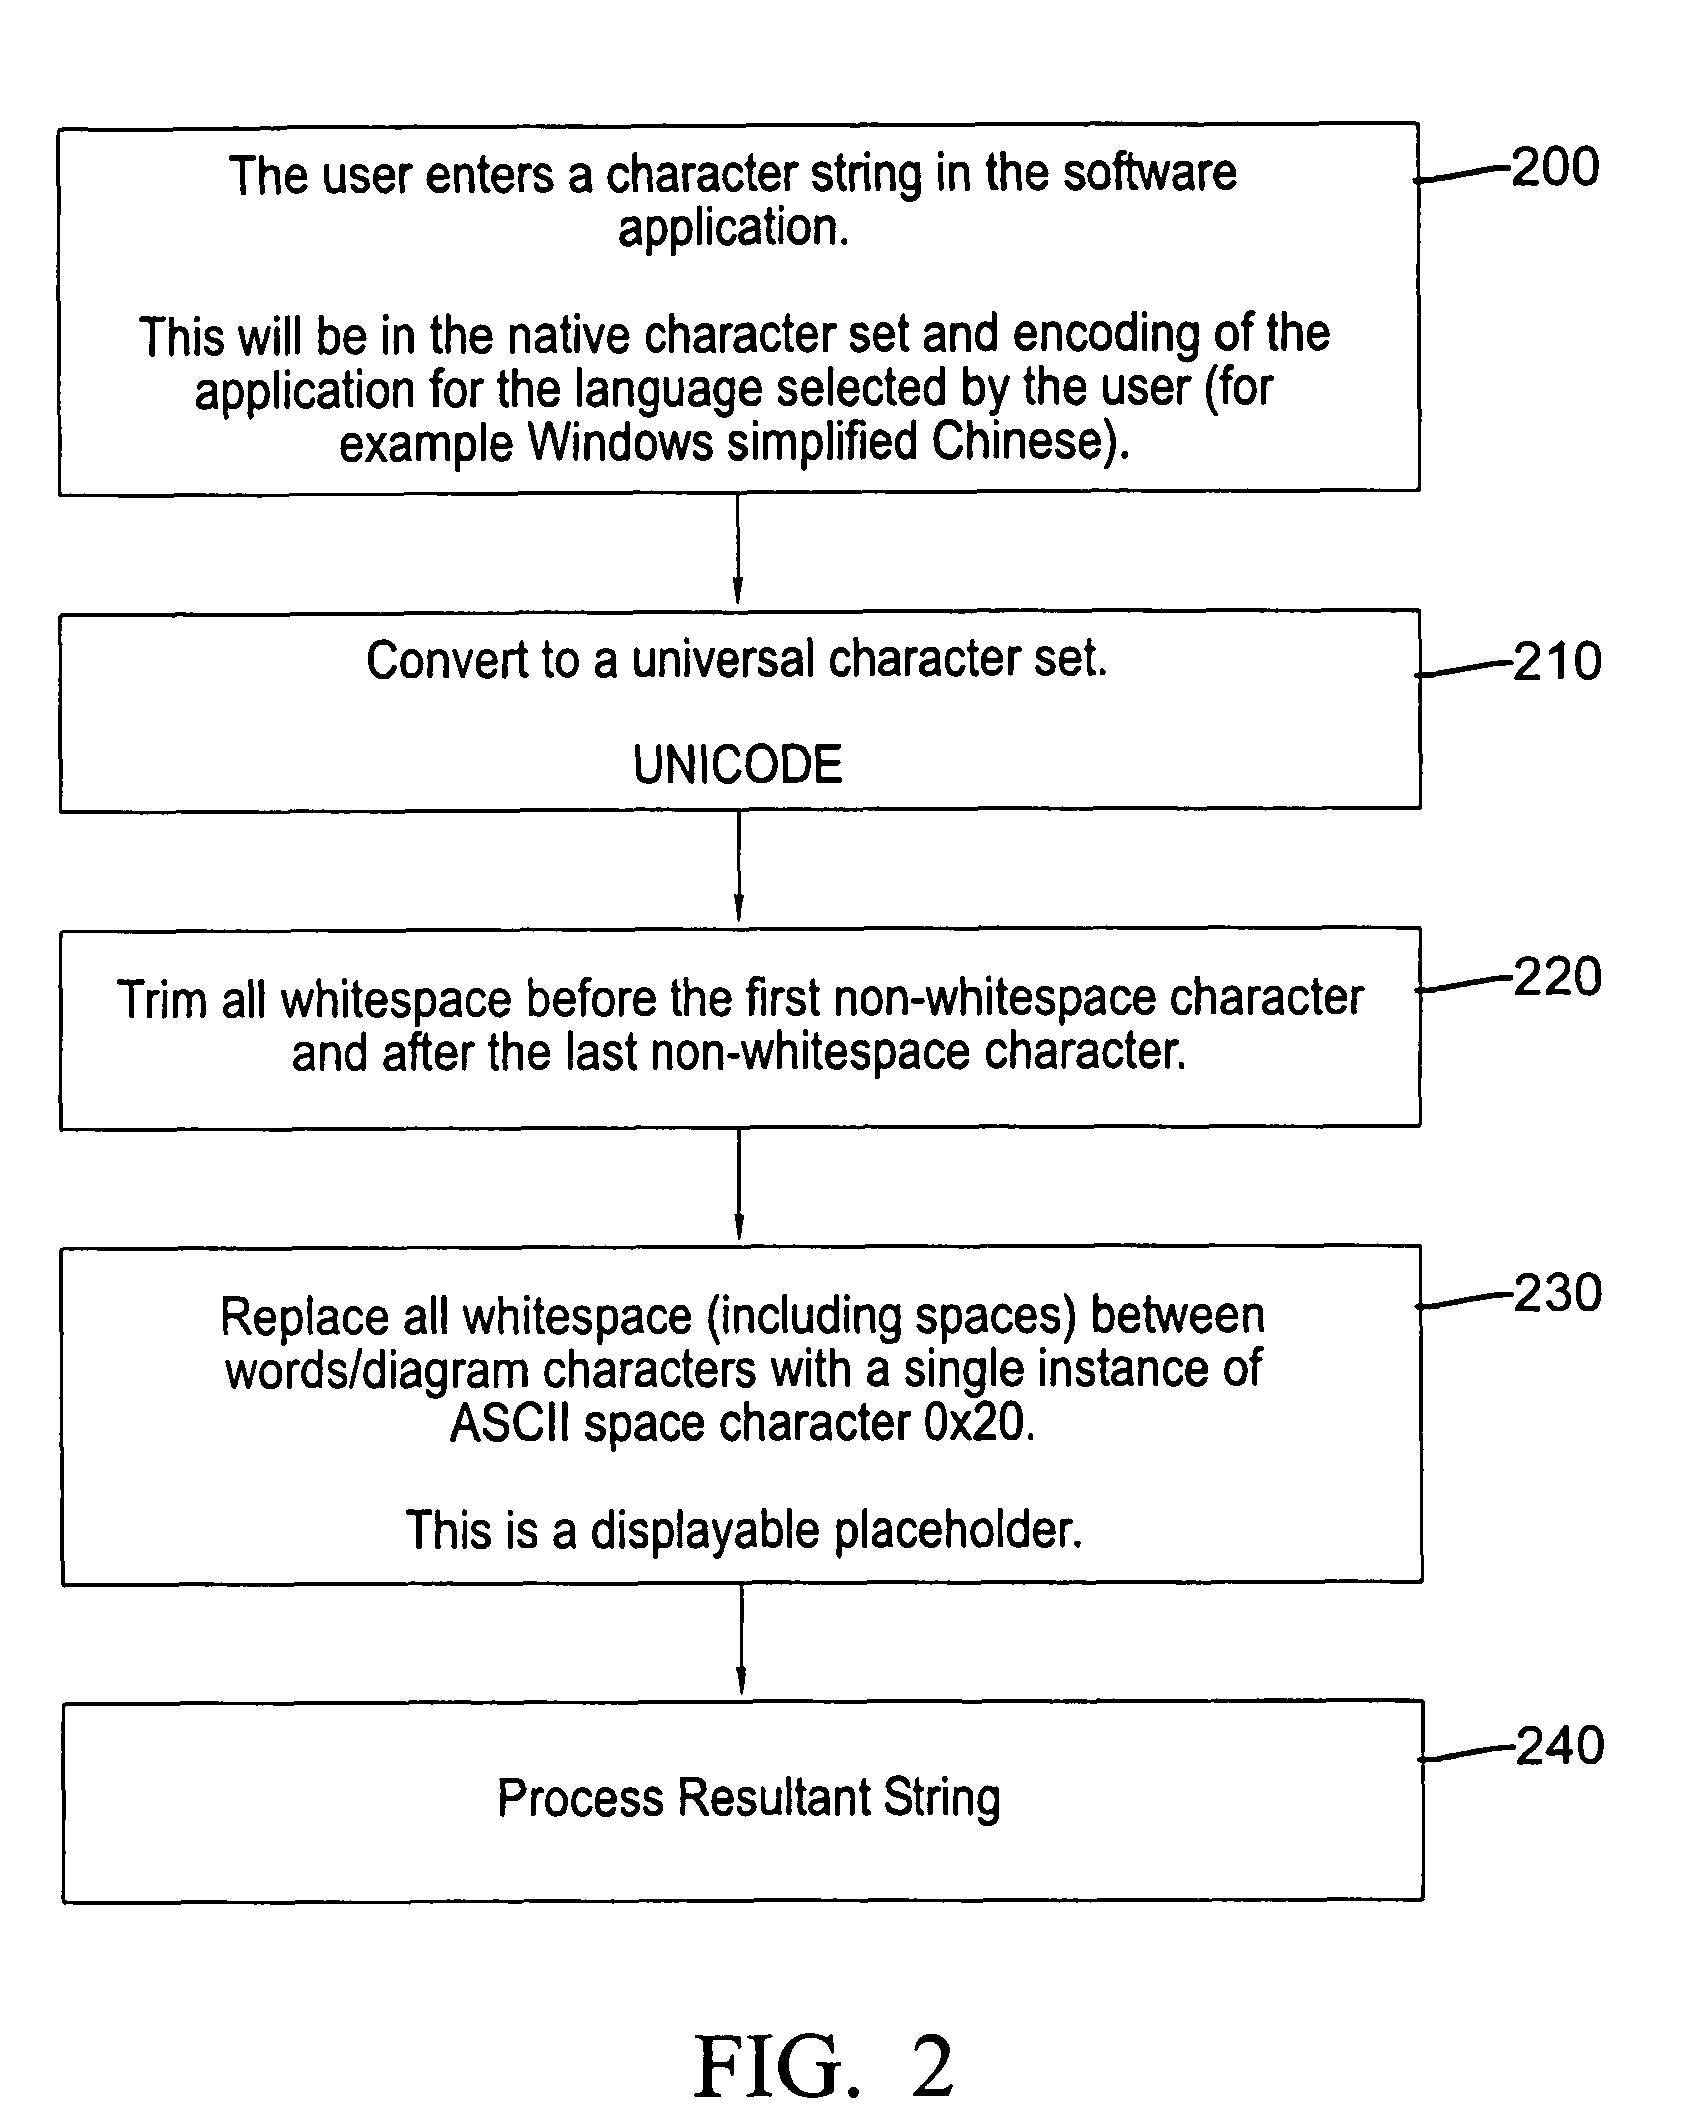 Processing of user character inputs having whitespace